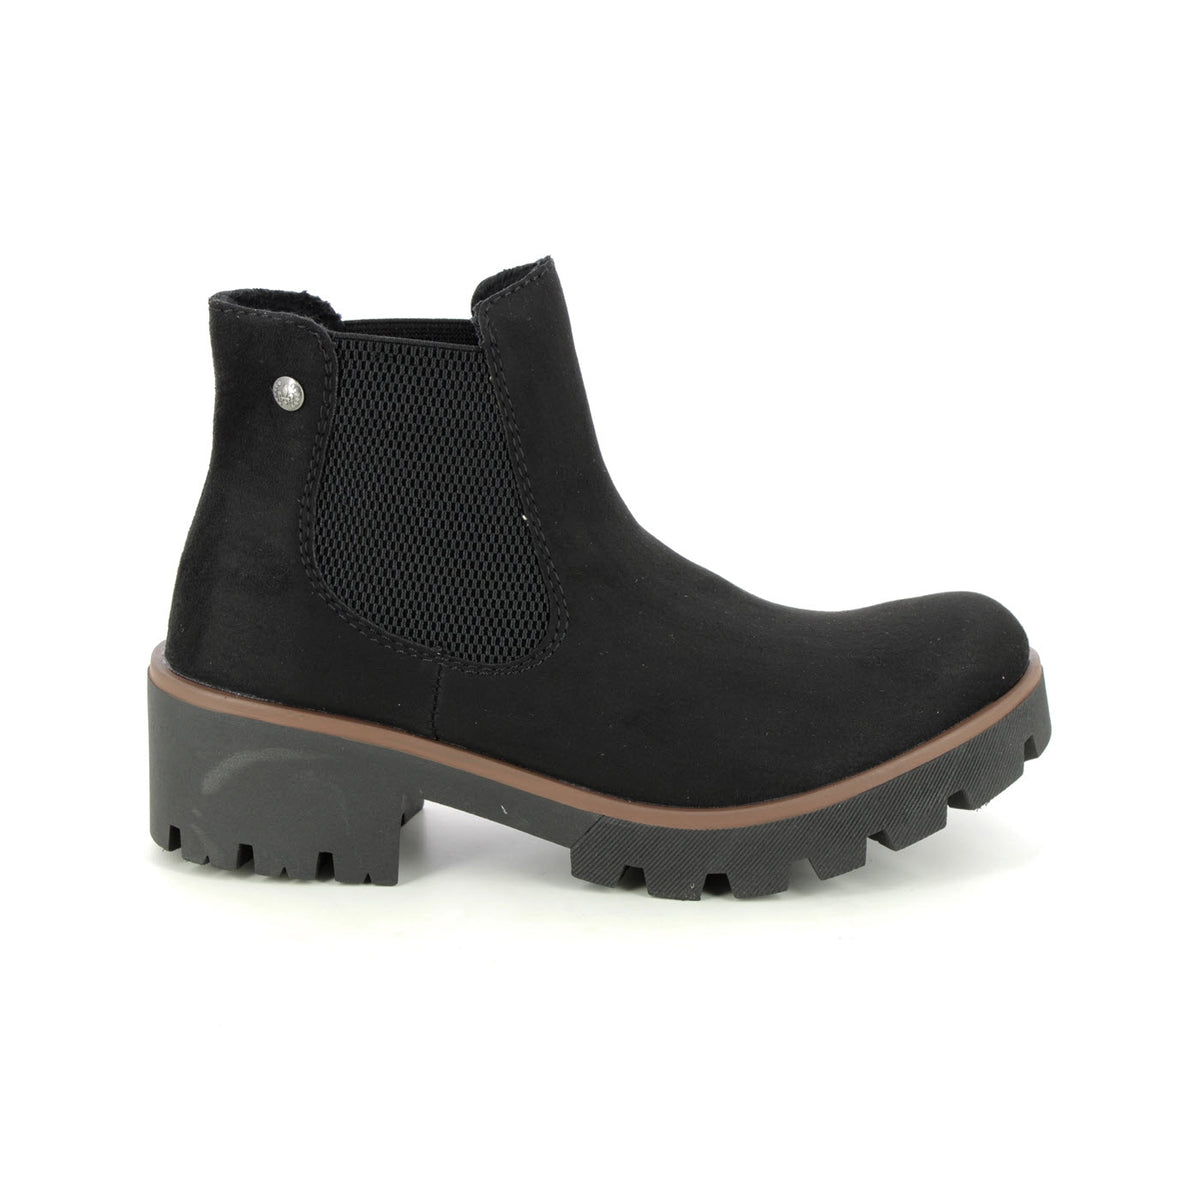 A side view of a graphite black RIEKER CHUNKY HEEL CHELSEA BLACK STRETCH - WOMENS with a chunky sole, brown trim, and elastic side panels for easy slip-on. The boot also features a soft insole for added comfort.